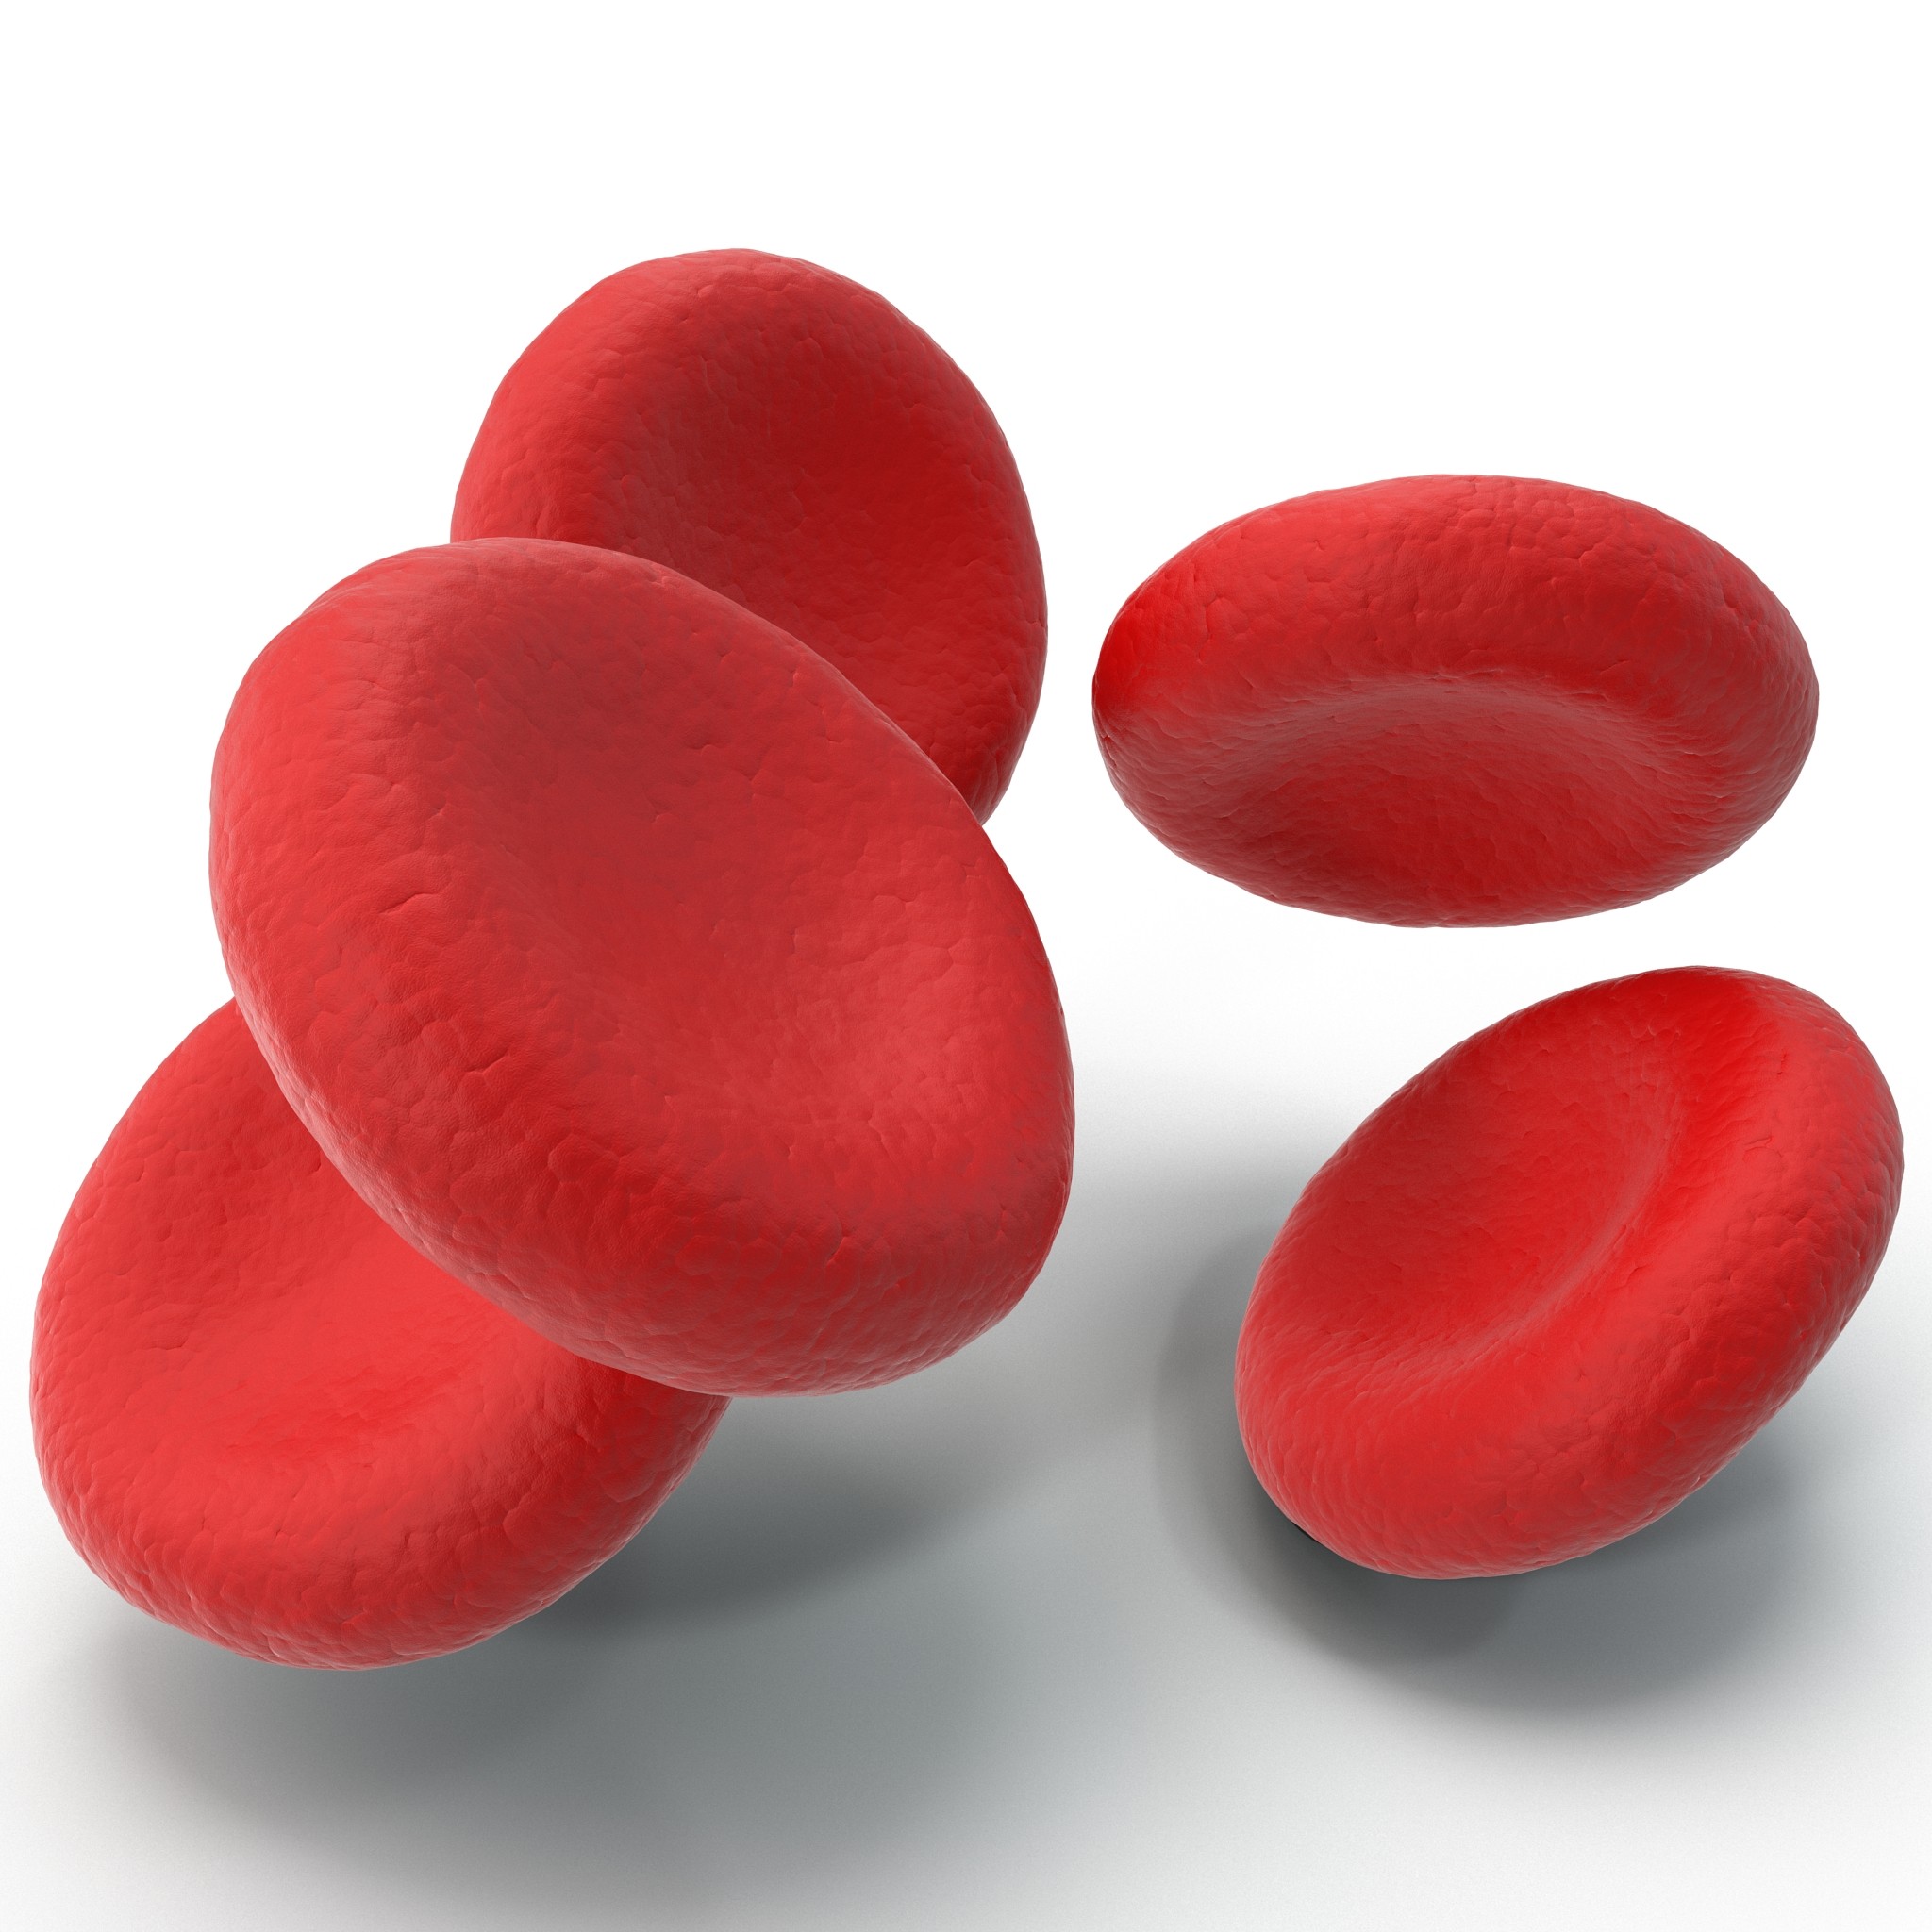 free clip art red blood cells - photo #40